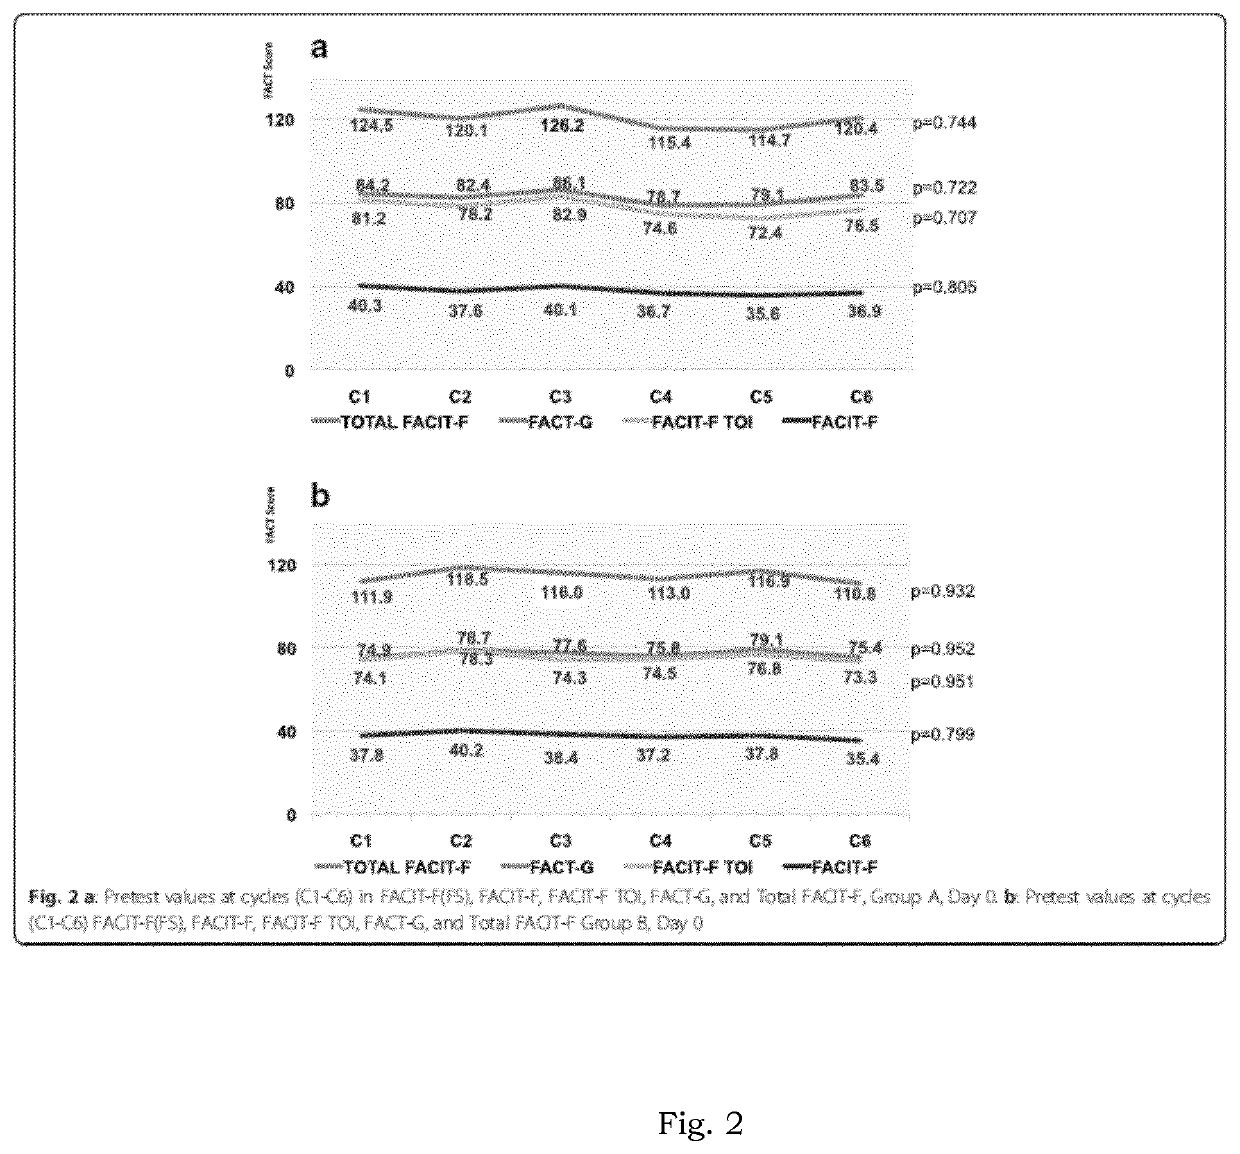 Effects of a short-term fasting mimicking diet on quality of life and tolerance to chemotherapy in patients with cancer